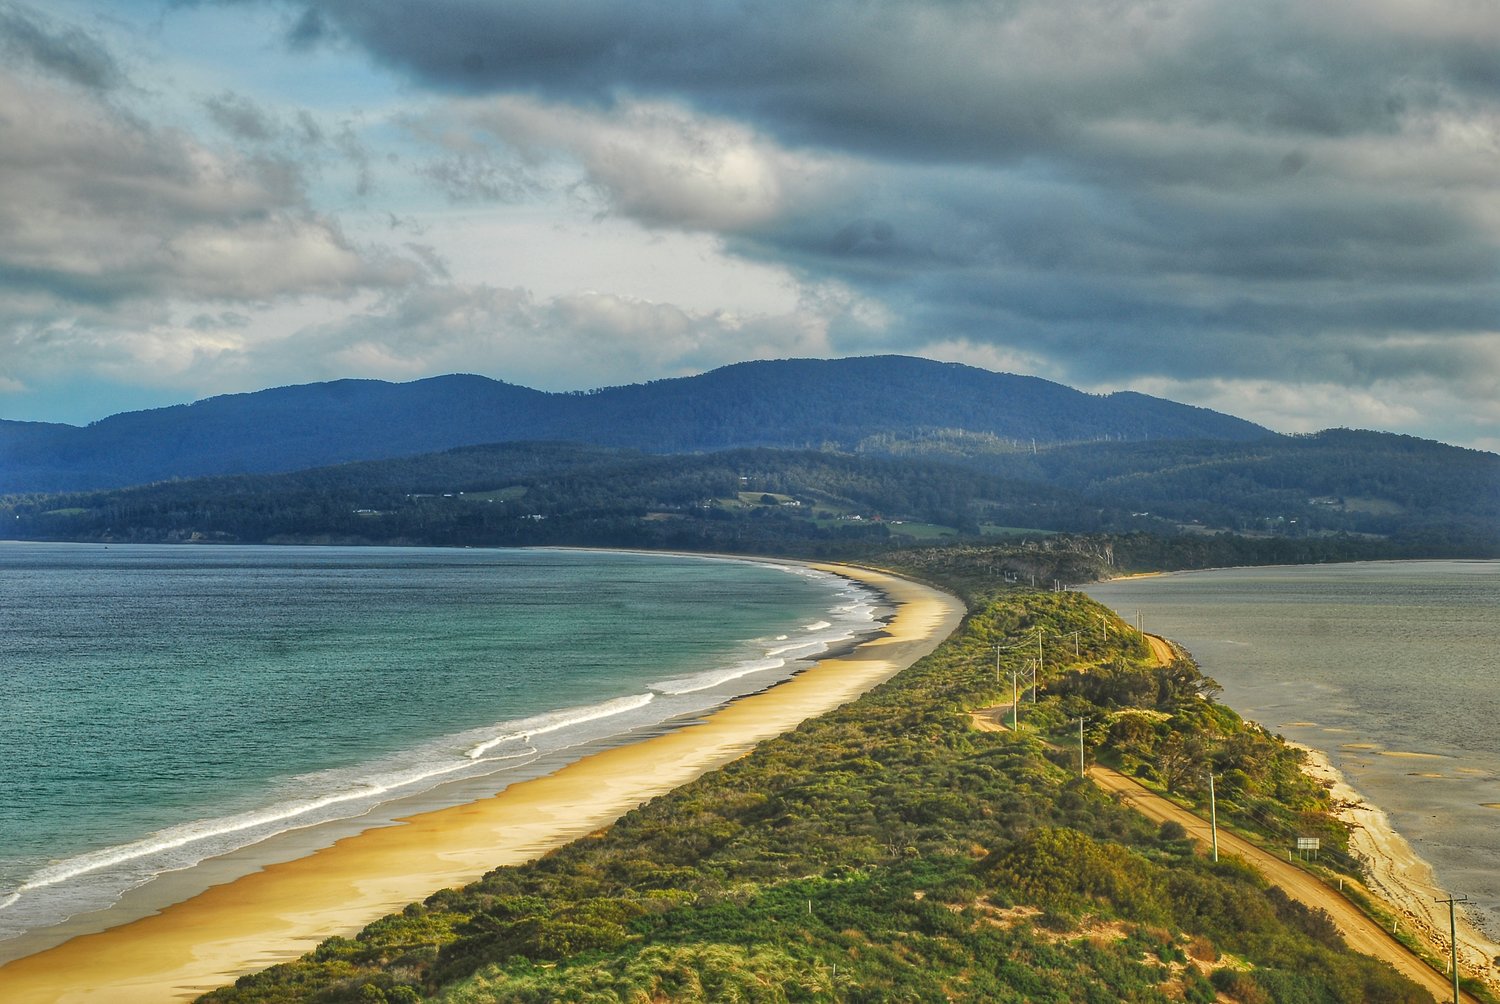 It's Time to Take Geography Test — Can You Get 18 on This 'Round World Quiz? Isthmus Bay, Bruny Island, Tasmania, Australia